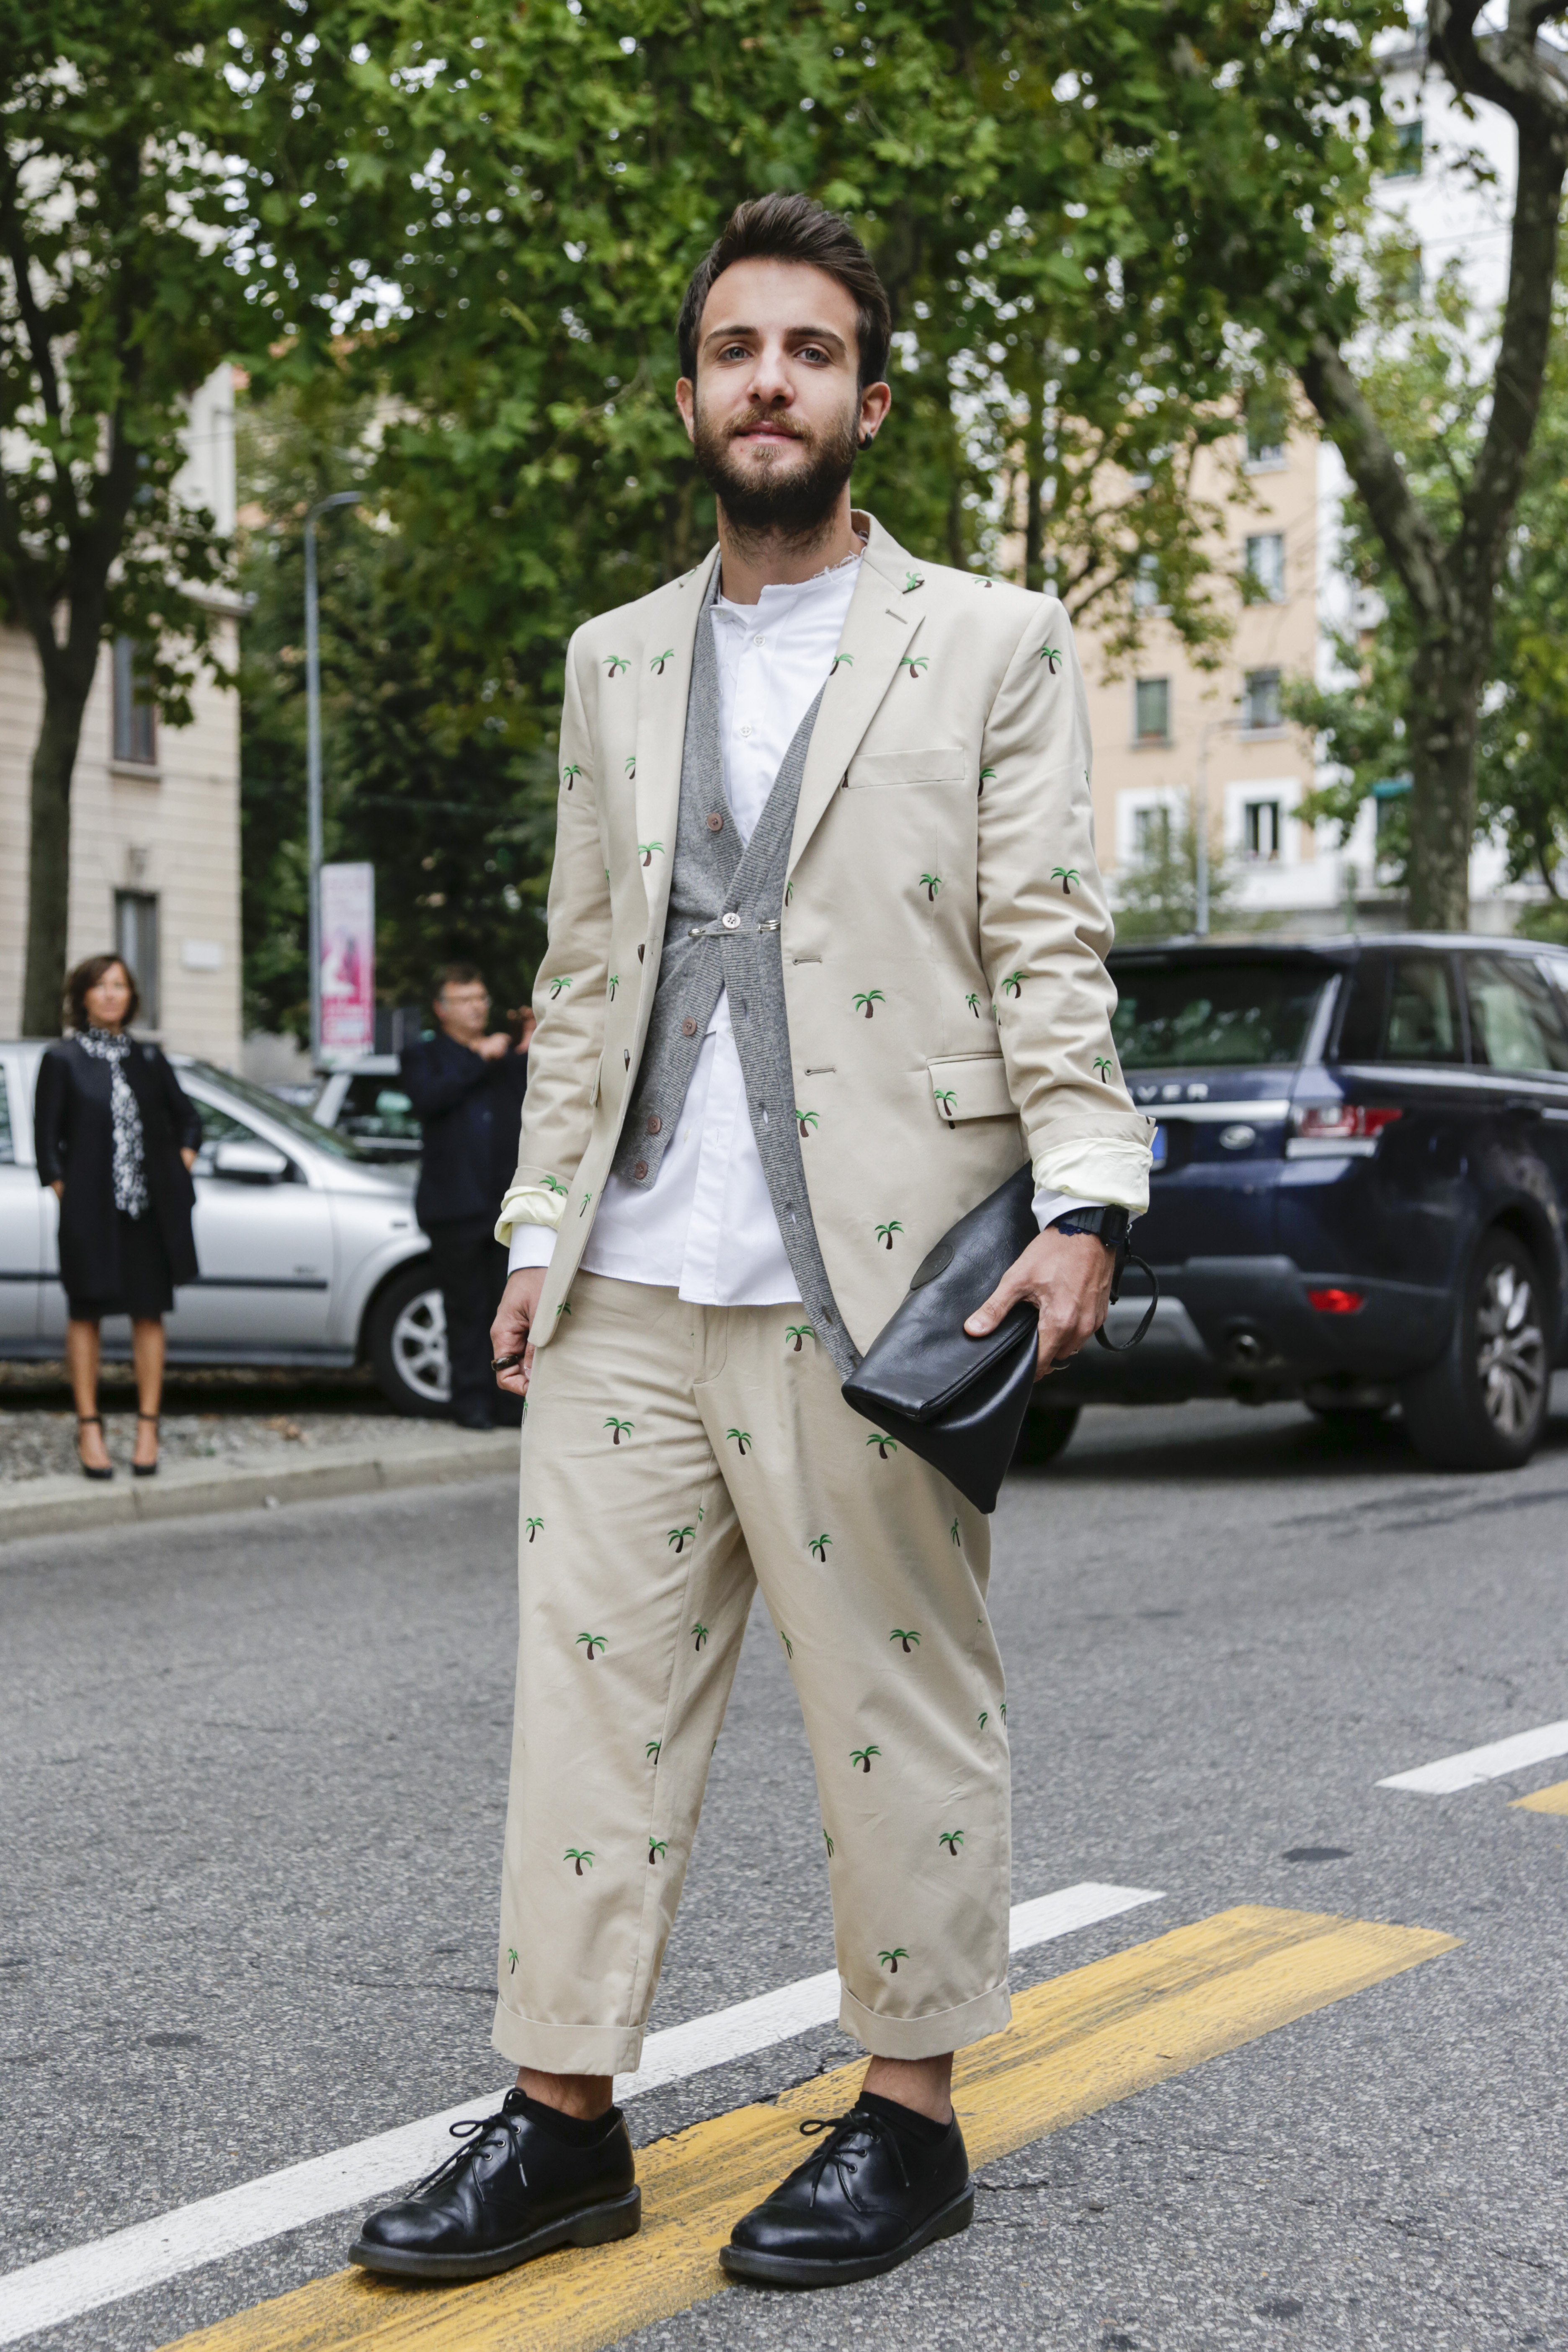 12 men in unconventional suits | Team Peter Stigter, catwalk show ...